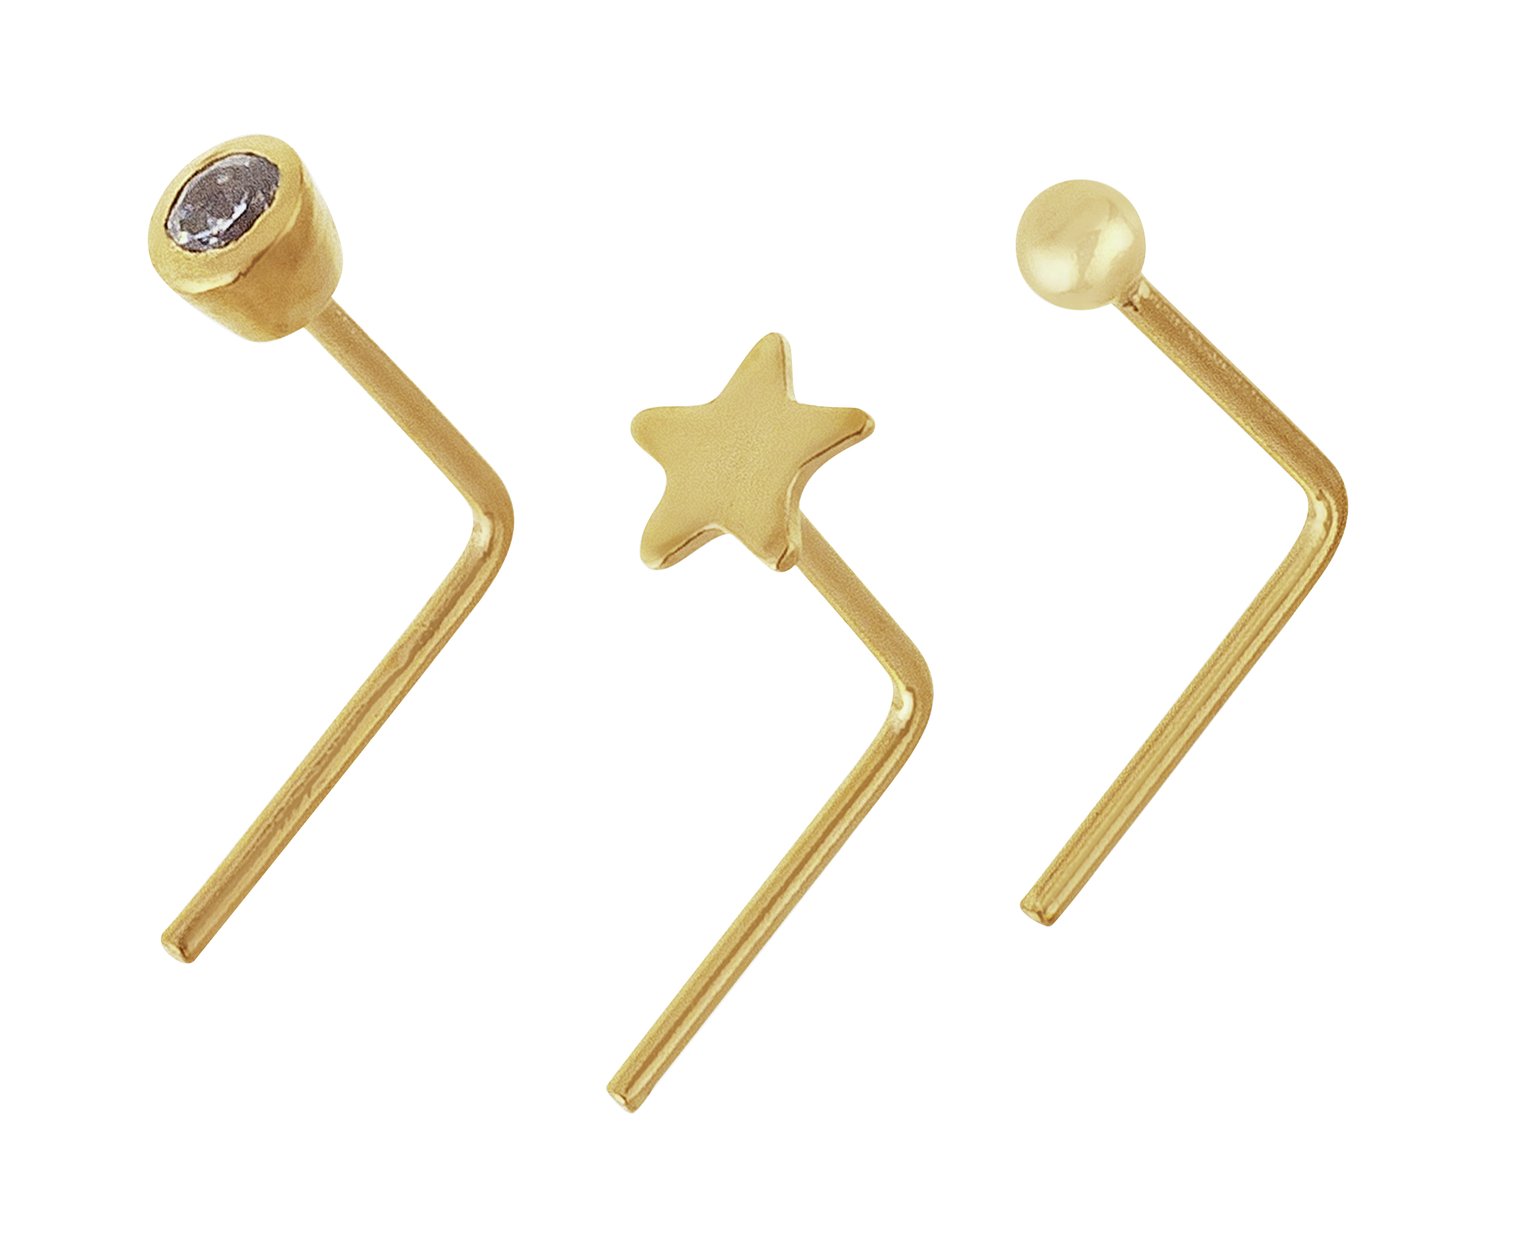 State of Mine 9ct Gold Crystal Nose Studs - Set of 3